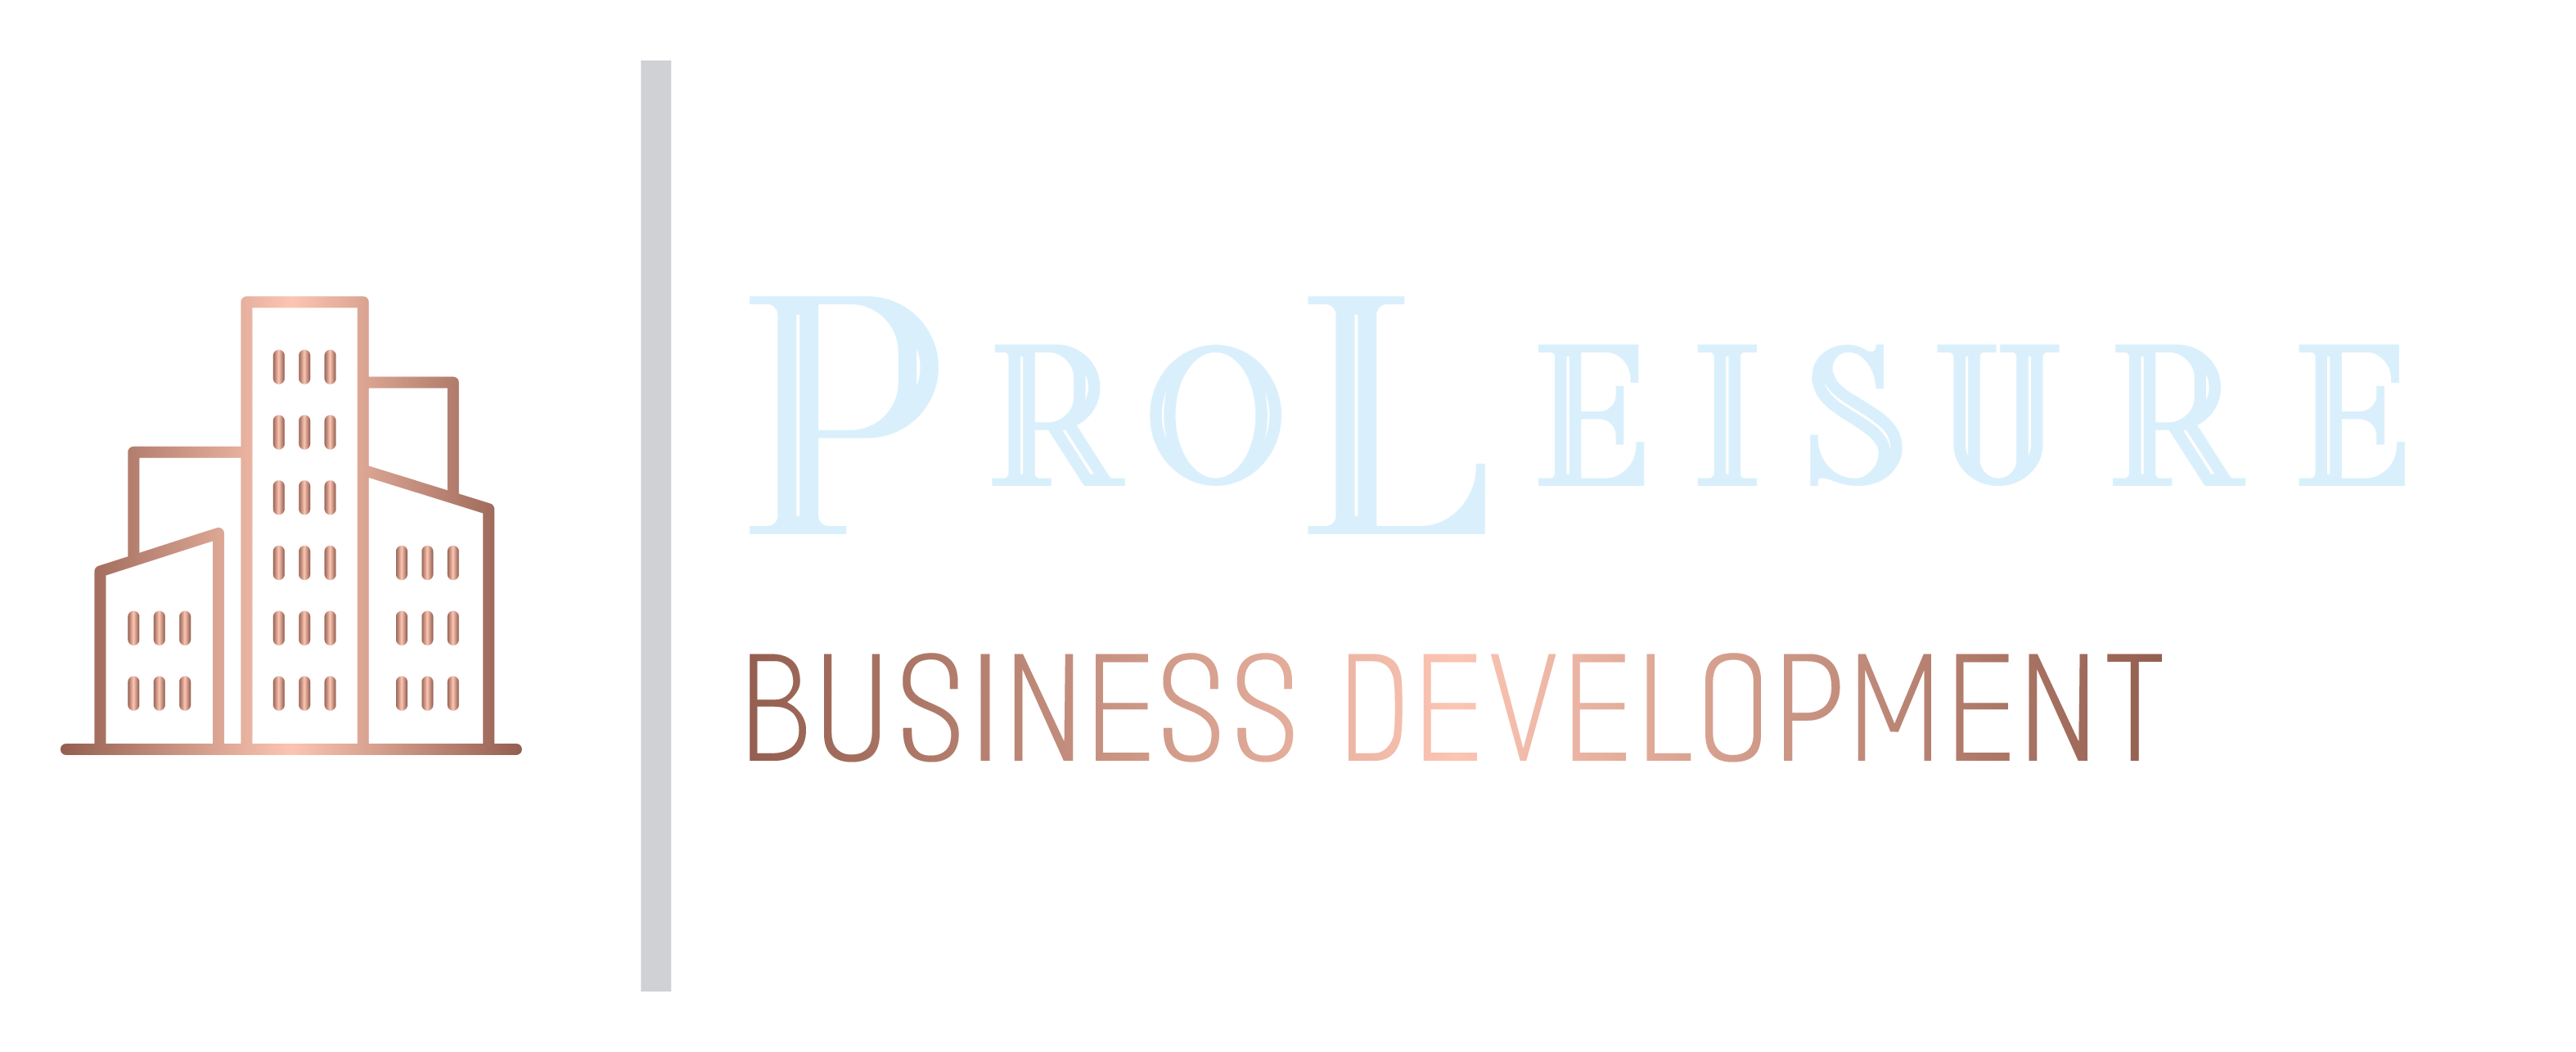 WE Build your Business